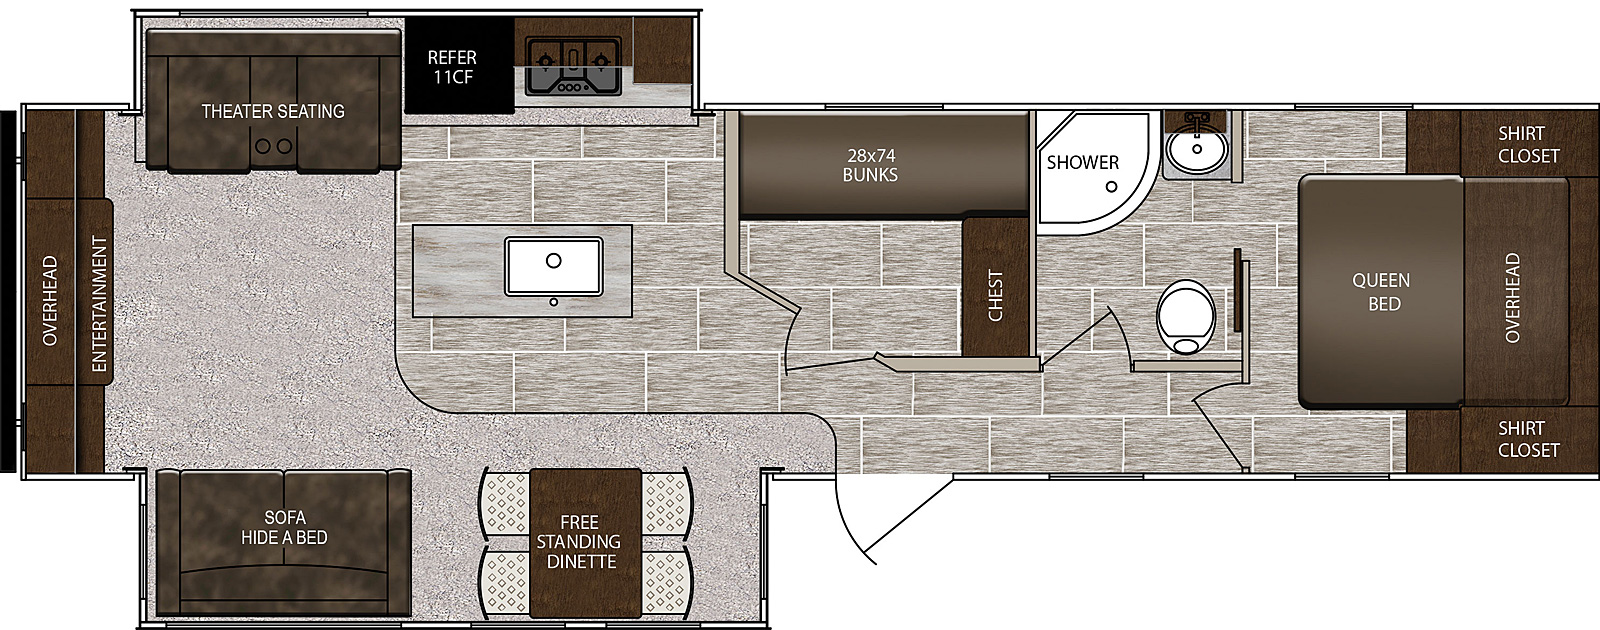 LaCrosse 3370MB floorplan. The 3370MB has 2 slide outs and one entry door.